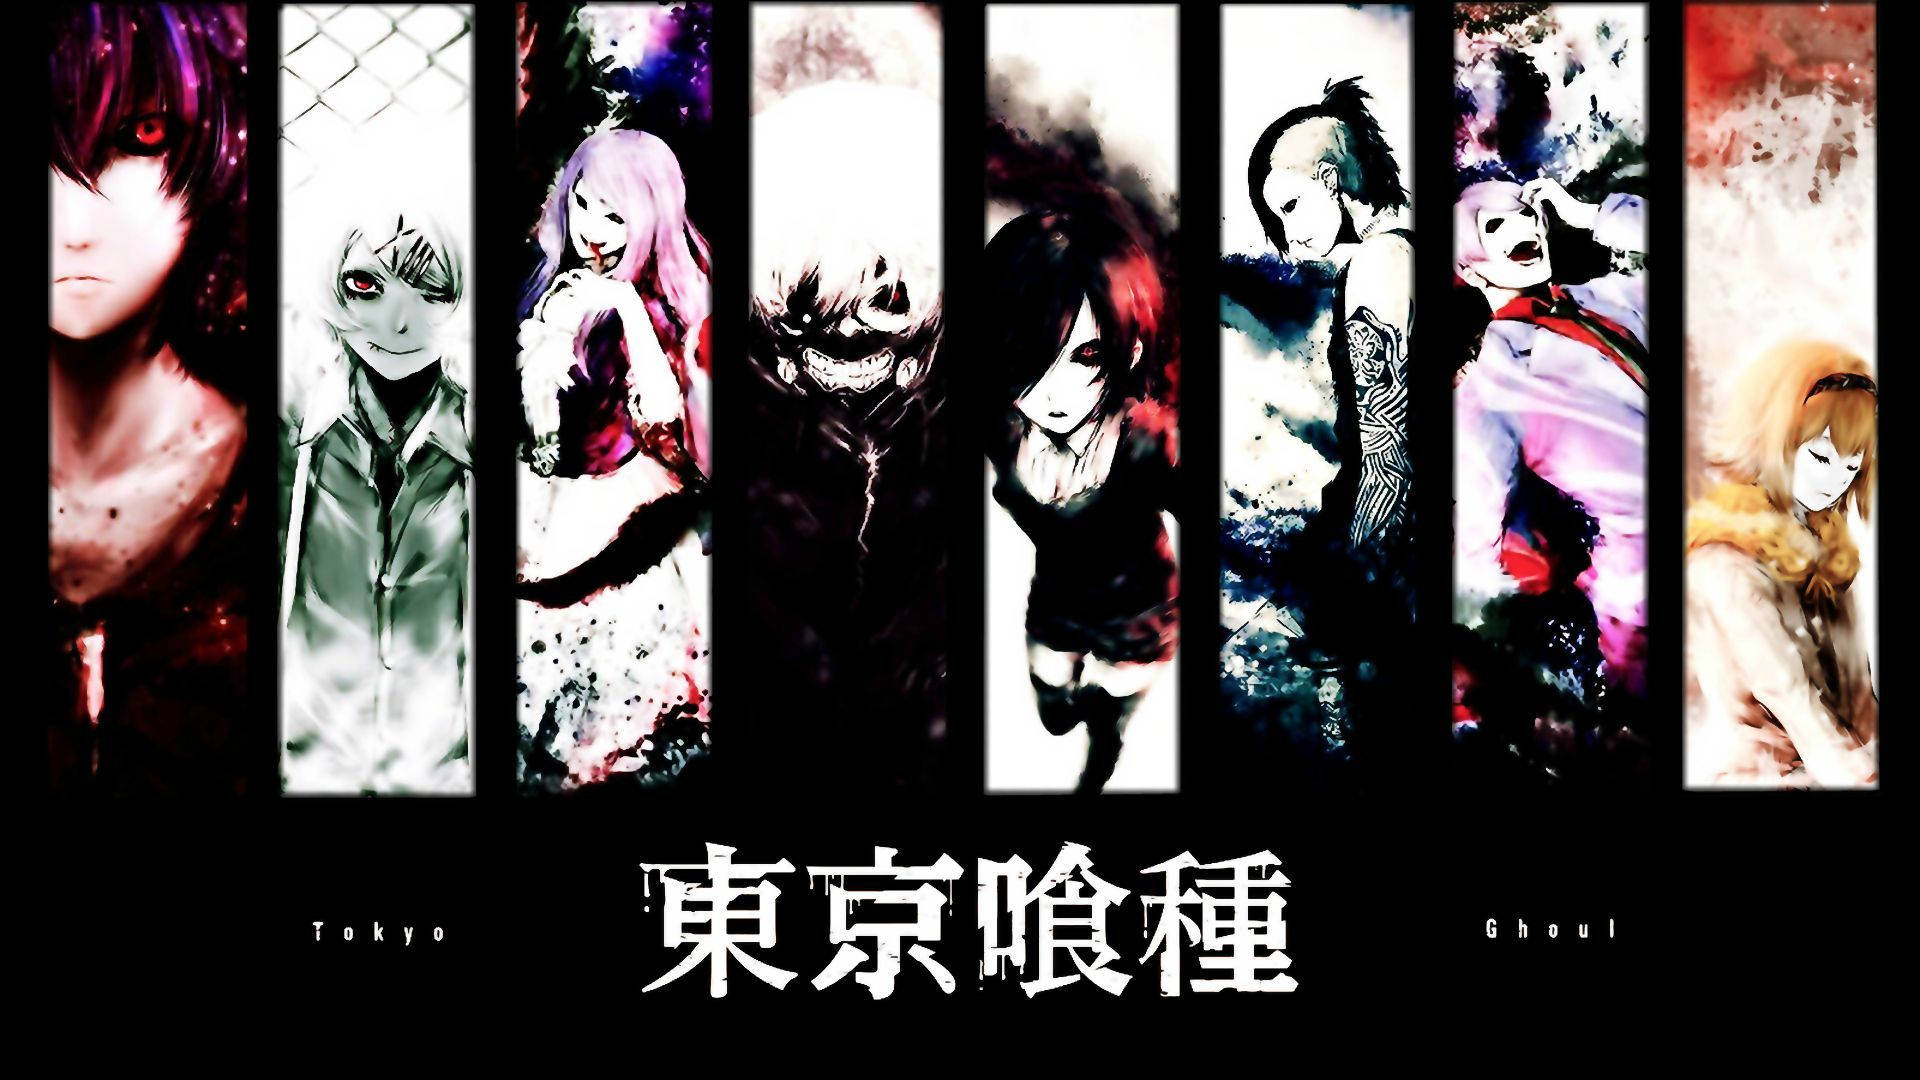 Tokyo Ghoul Characters Collage